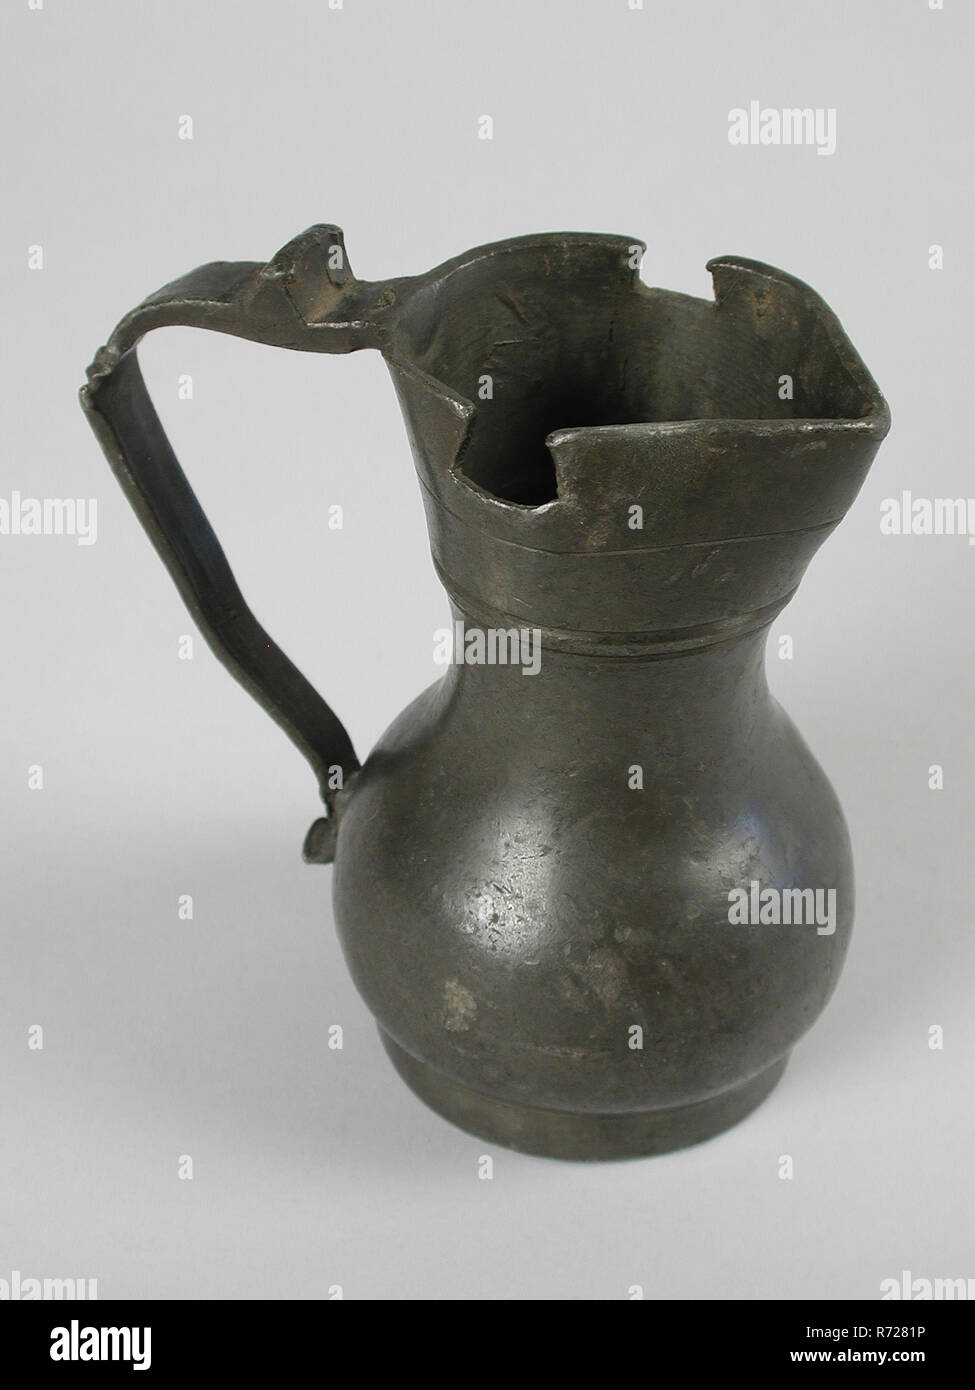 Pewter measuring jug, Measuring jug be measuring instrument tin, molded Flat bottom horizontal soldered bevel inclined hollow plinth spherical body high neck with flared collar with pouring spout and two holes in top edge question marked ear with upright thumb rest calibration letters, on board VS and on ear SSZ measurement Stock Photo